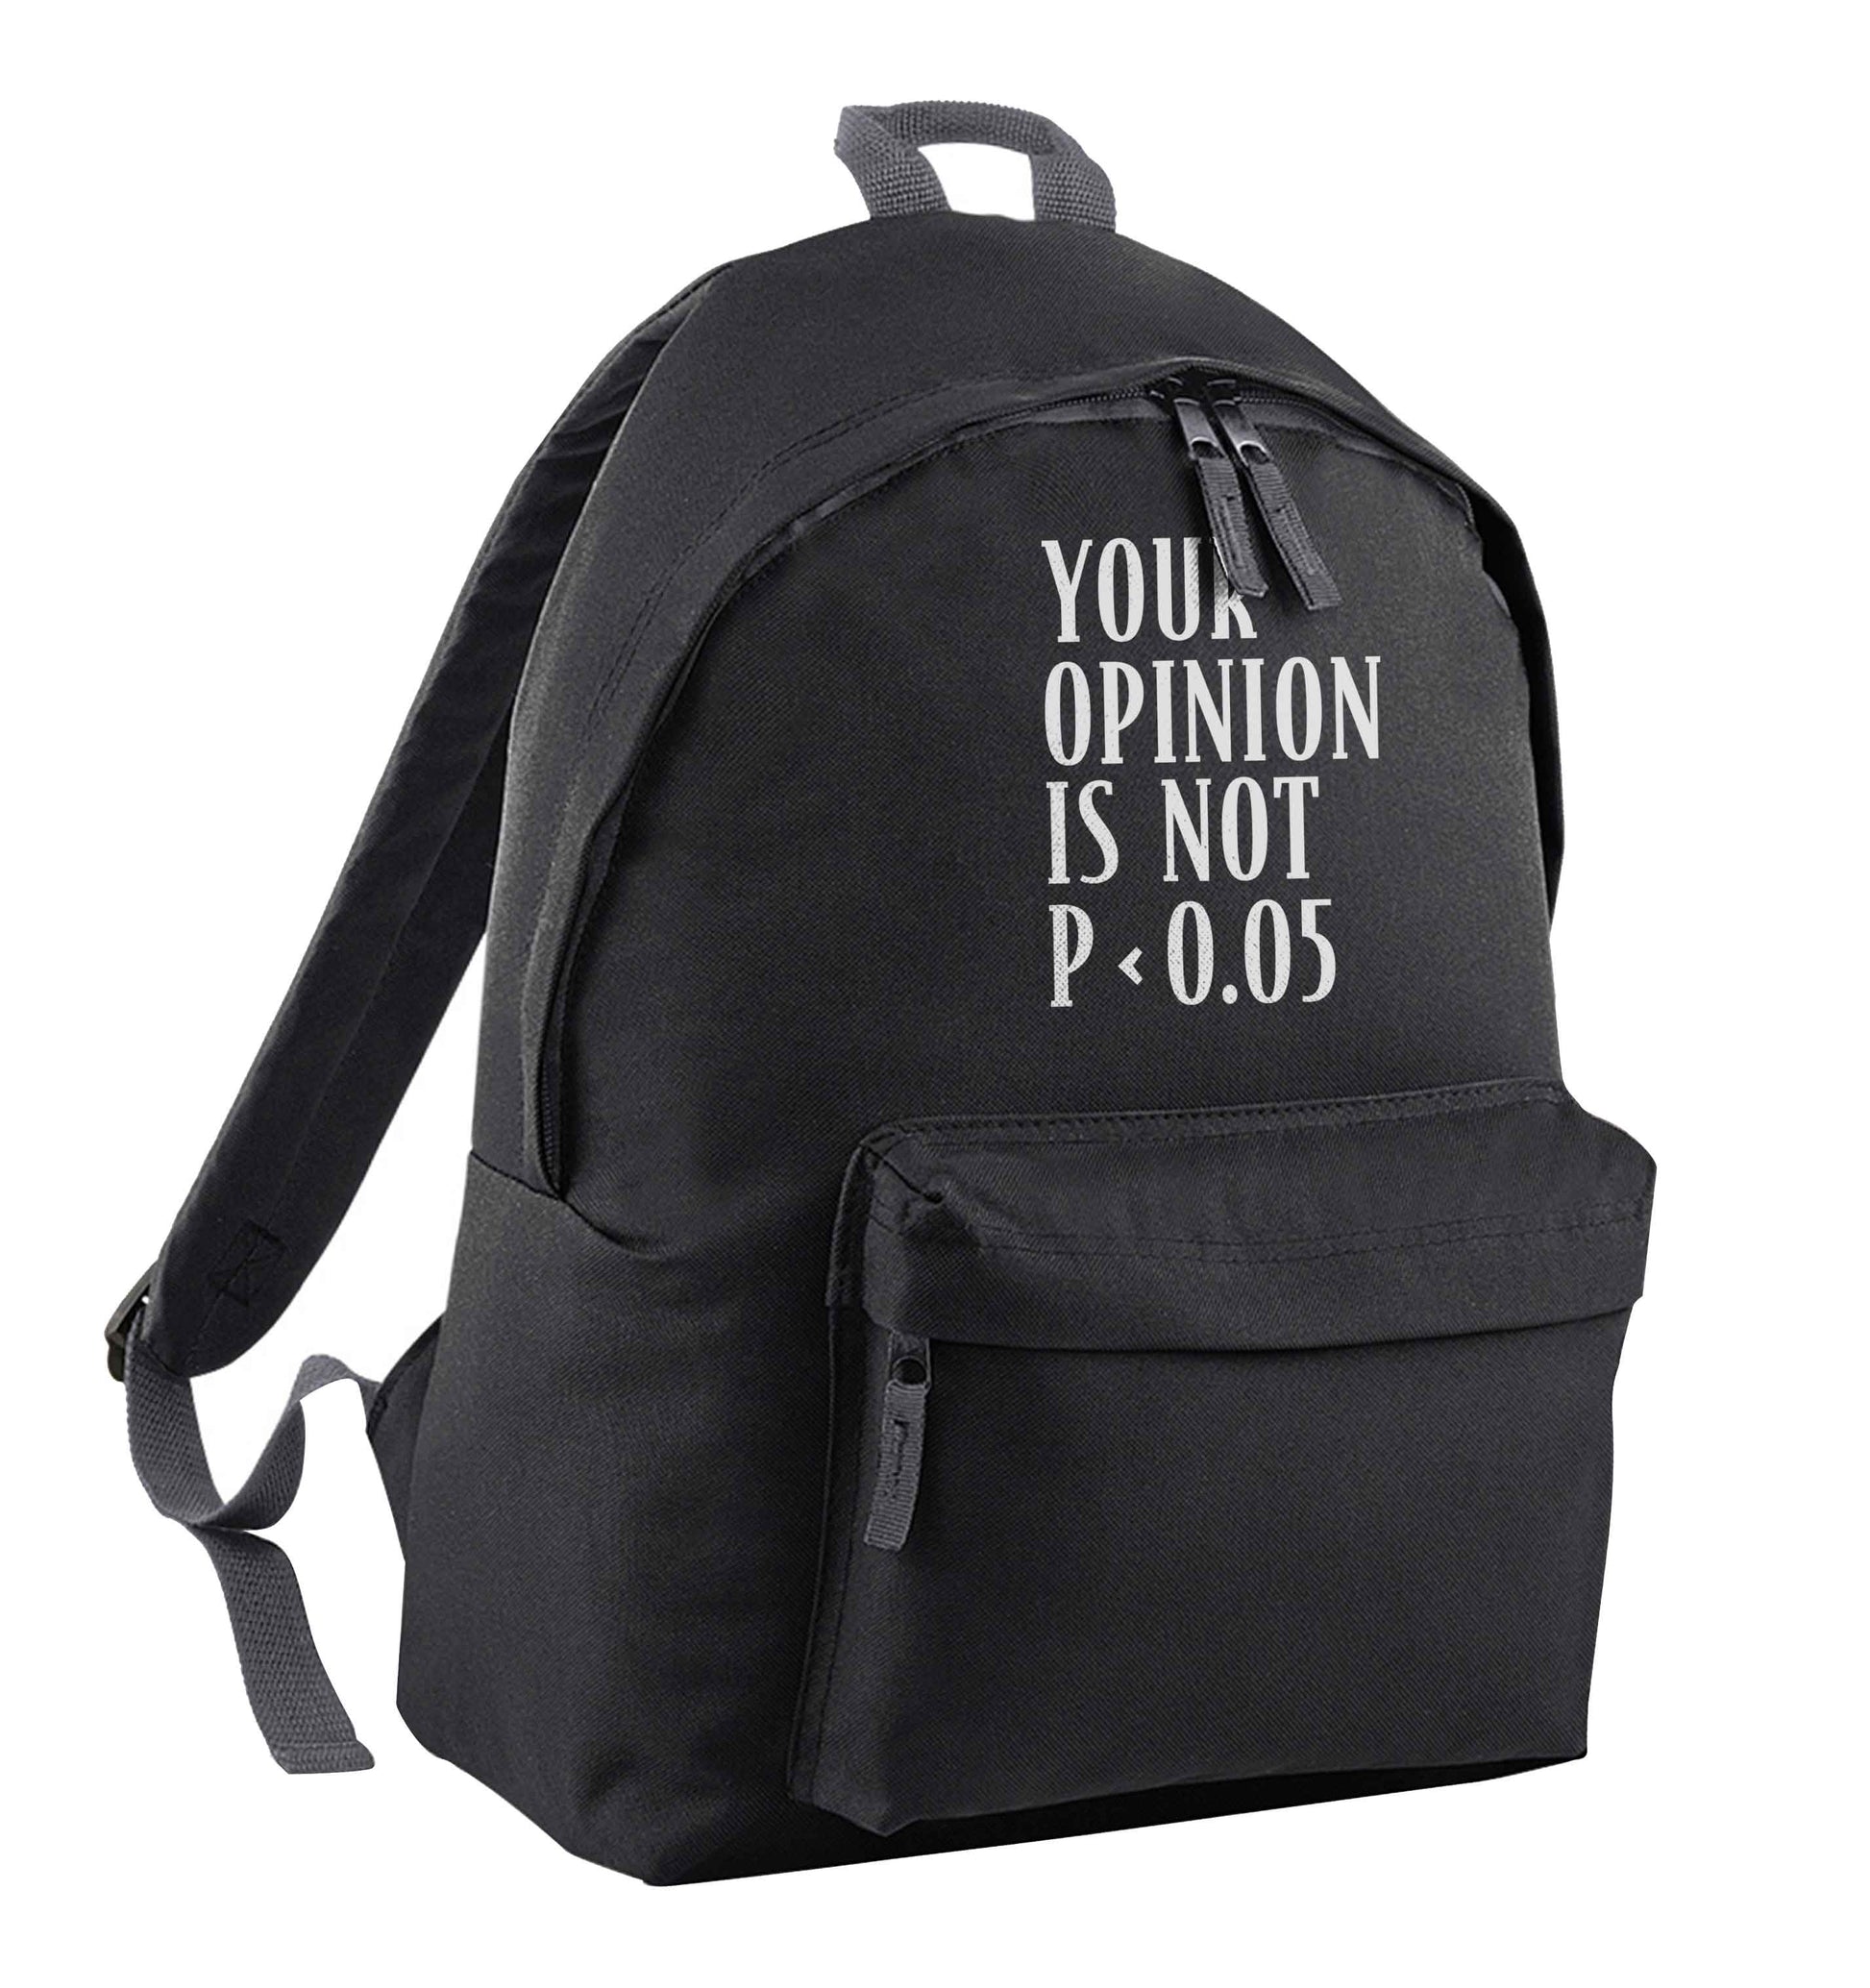 Your opinion is not P < 0.05black children's backpack